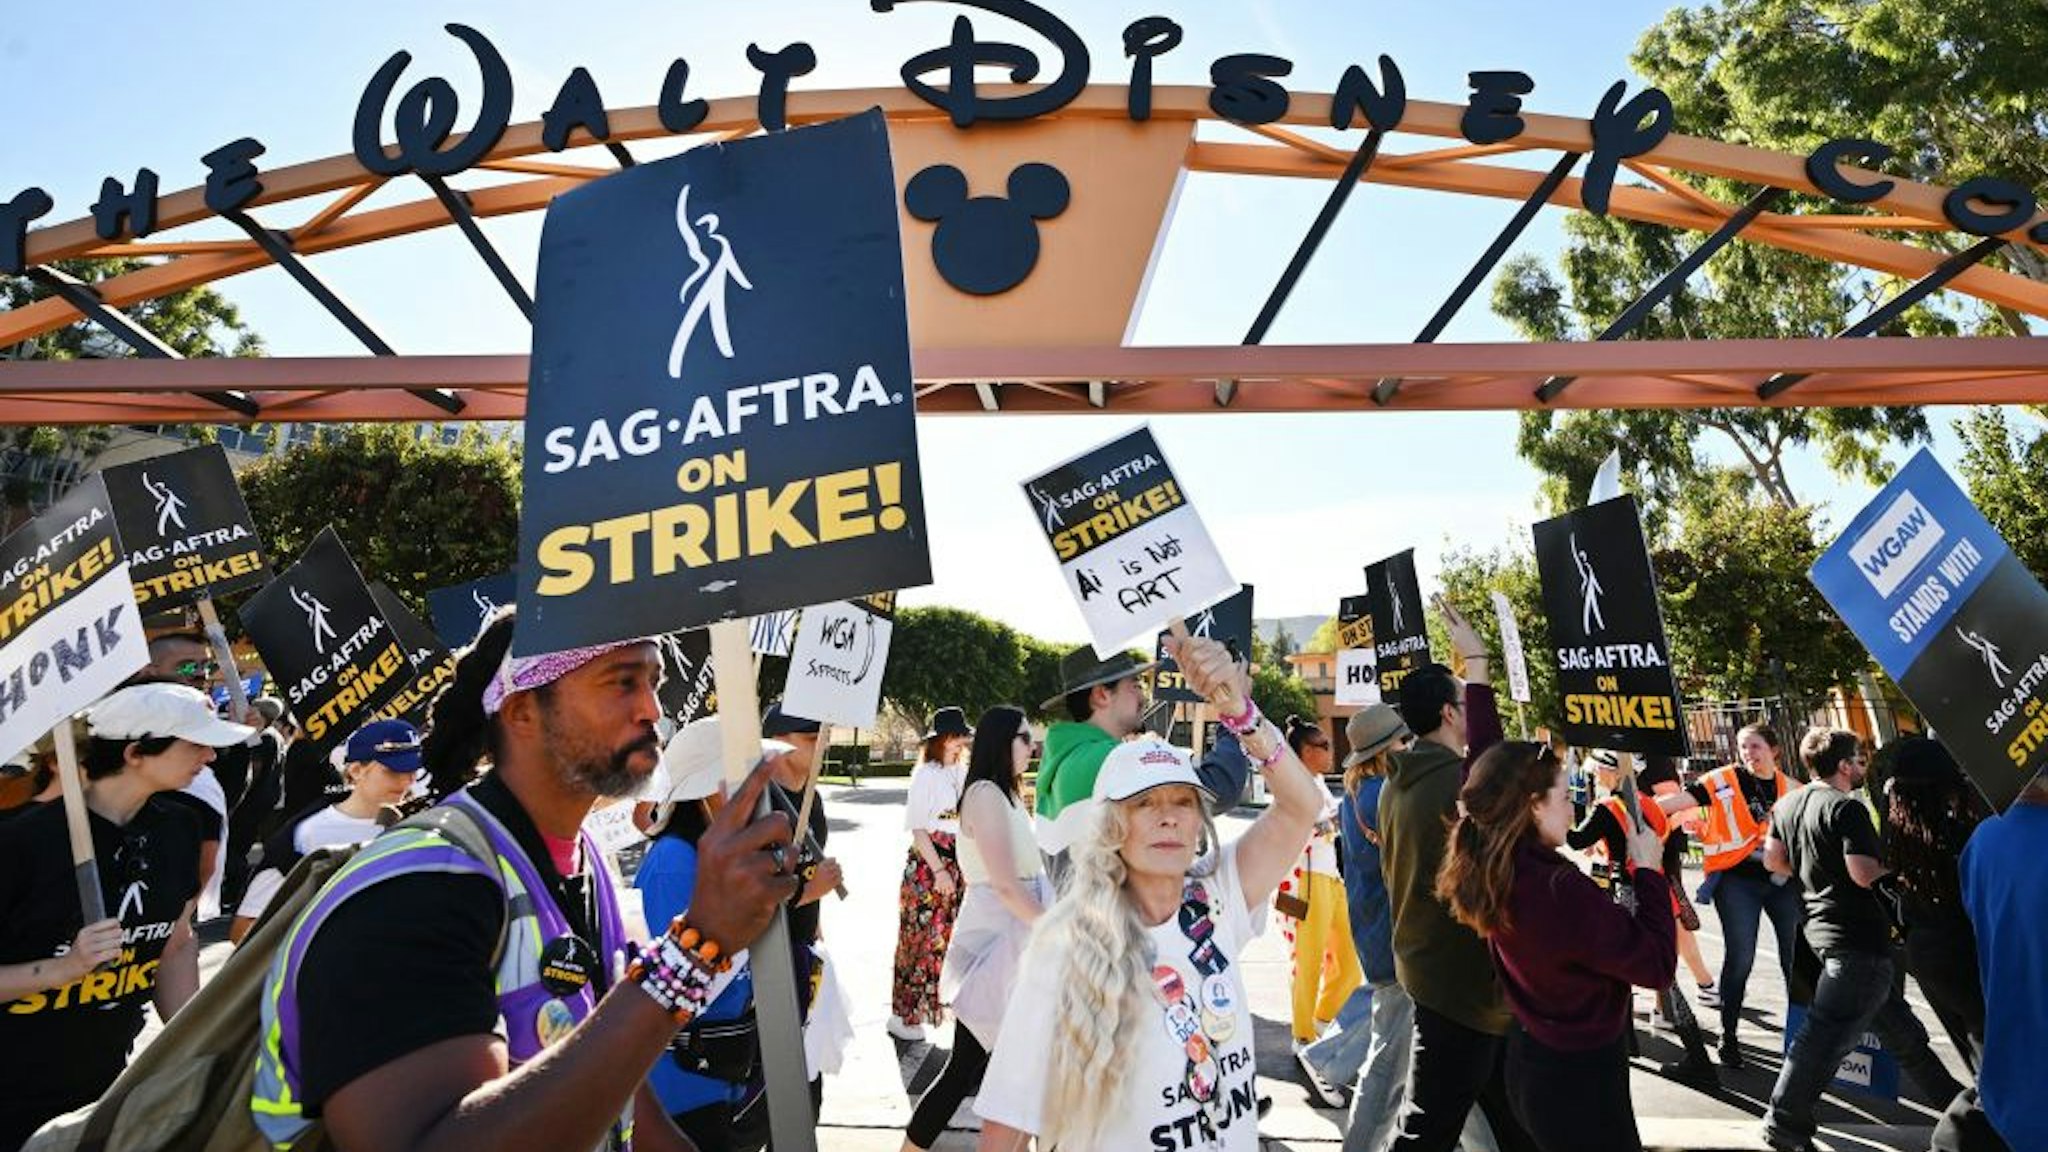 EDITORS NOTE: Graphic content / TOPSHOT - Actress Frances Fisher along SAG-AFTRA members and supporters pickets outside Disney Studios on day 111 of their strike against the Hollywood studios, in Burbank, California, on November 1, 2023. SAG-AFTRA members walked off film and TV sets in July, over terms including pay and the use of artificial intelligence. Talks have intensified in recent weeks, with the two sides meeting most days and expressing cautious optimism -- while also warning that they remain far apart on several key issues. (Photo by Frederic J. BROWN / AFP) (Photo by FREDERIC J. BROWN/AFP via Getty Images)